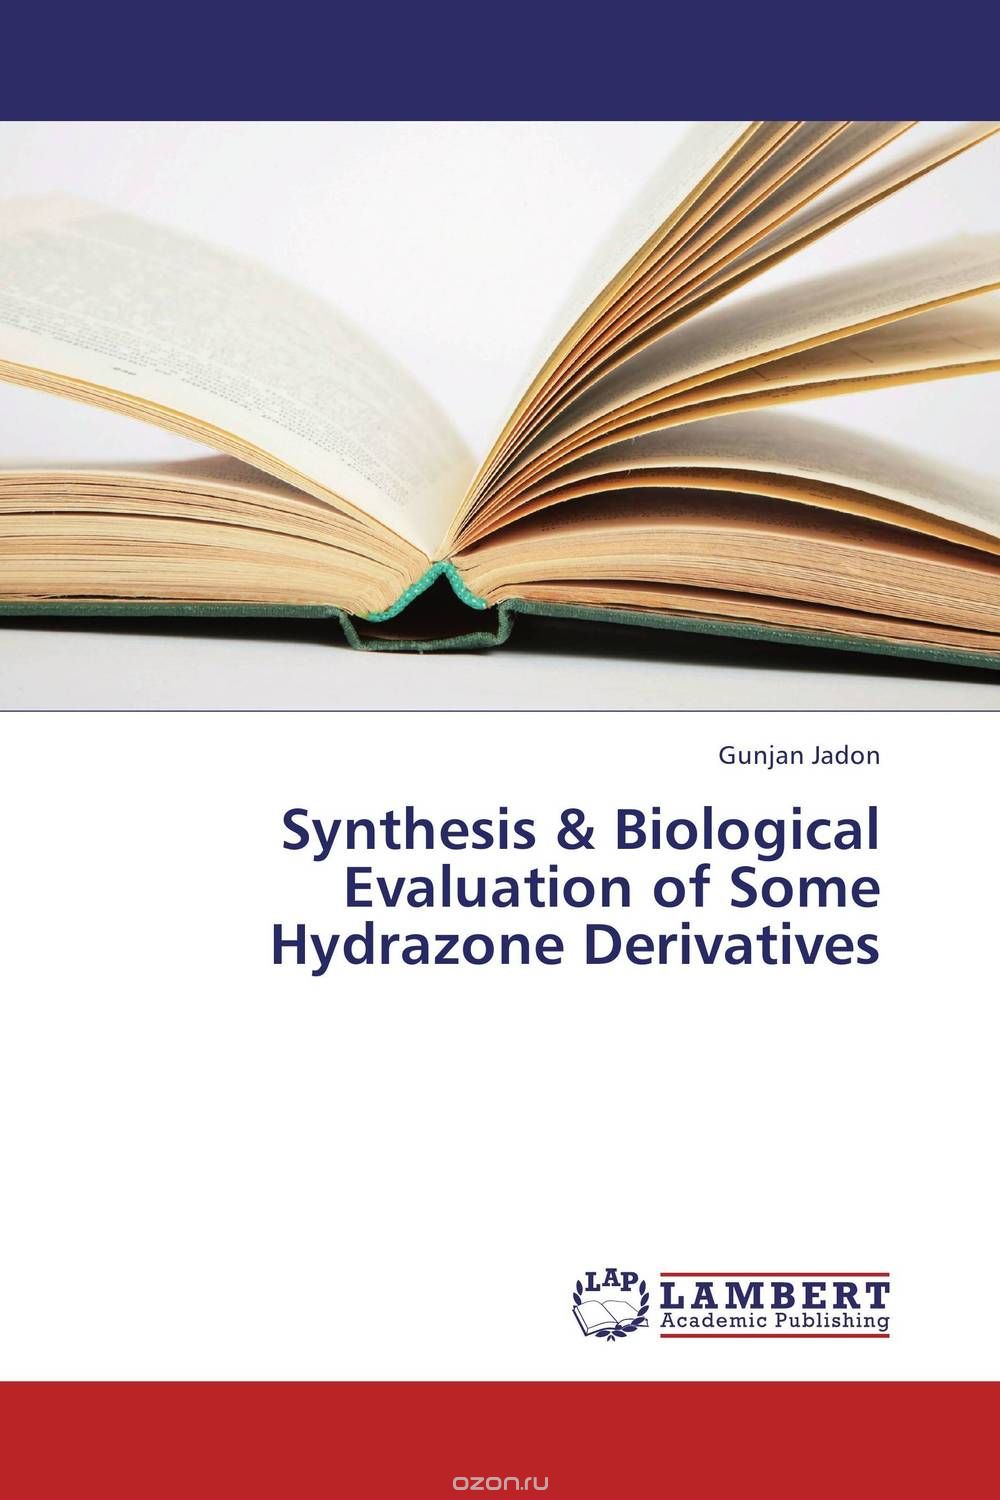 Synthesis & Biological Evaluation of Some Hydrazone Derivatives